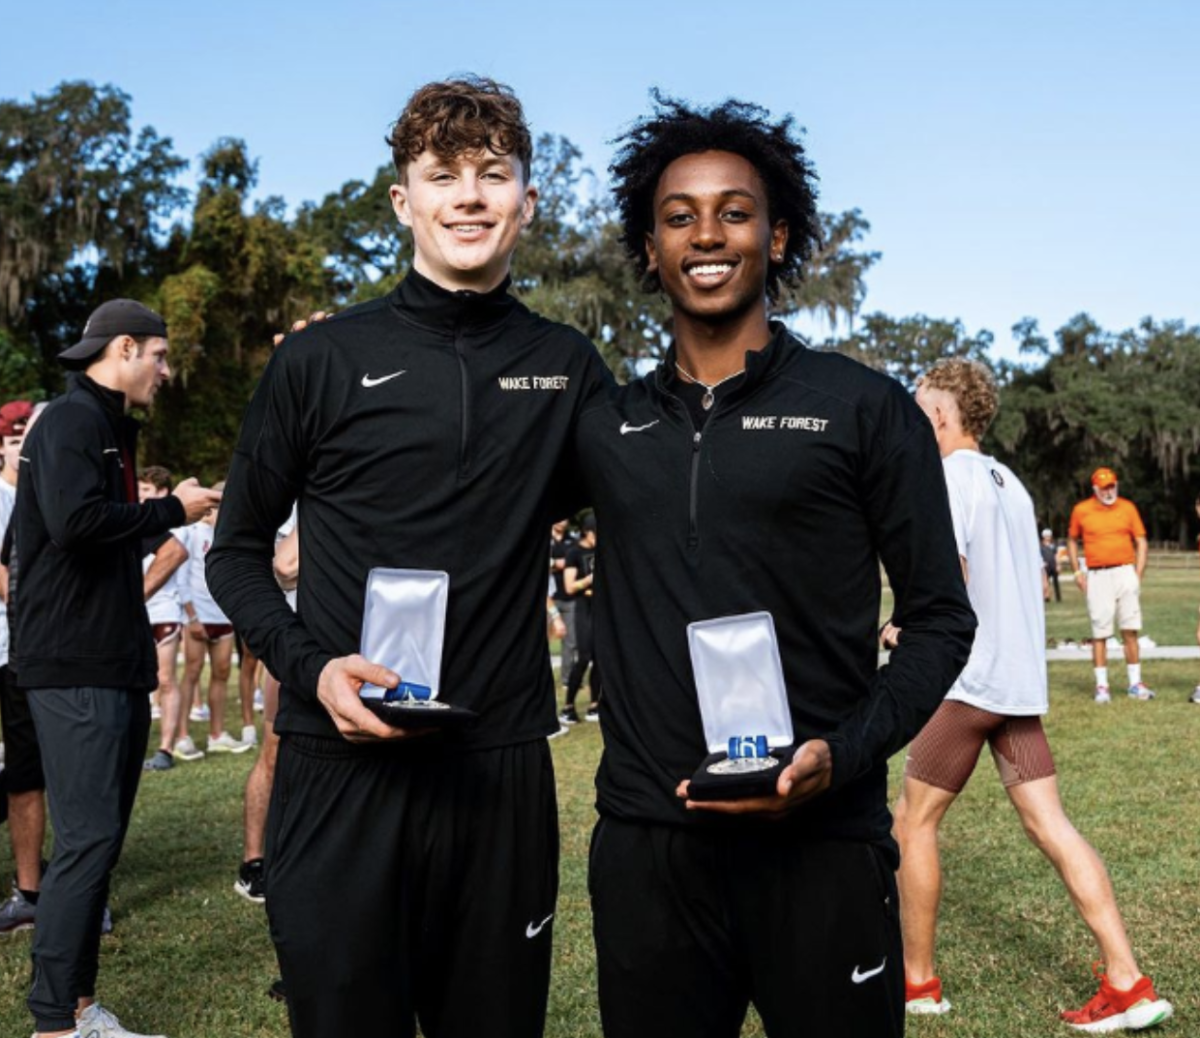 Joe O’Brien (left) and Luke Tewalt (right) pose with their All-ACC medals after Friday morning’s conference championship meet (Courtesy of WFU Athletics).